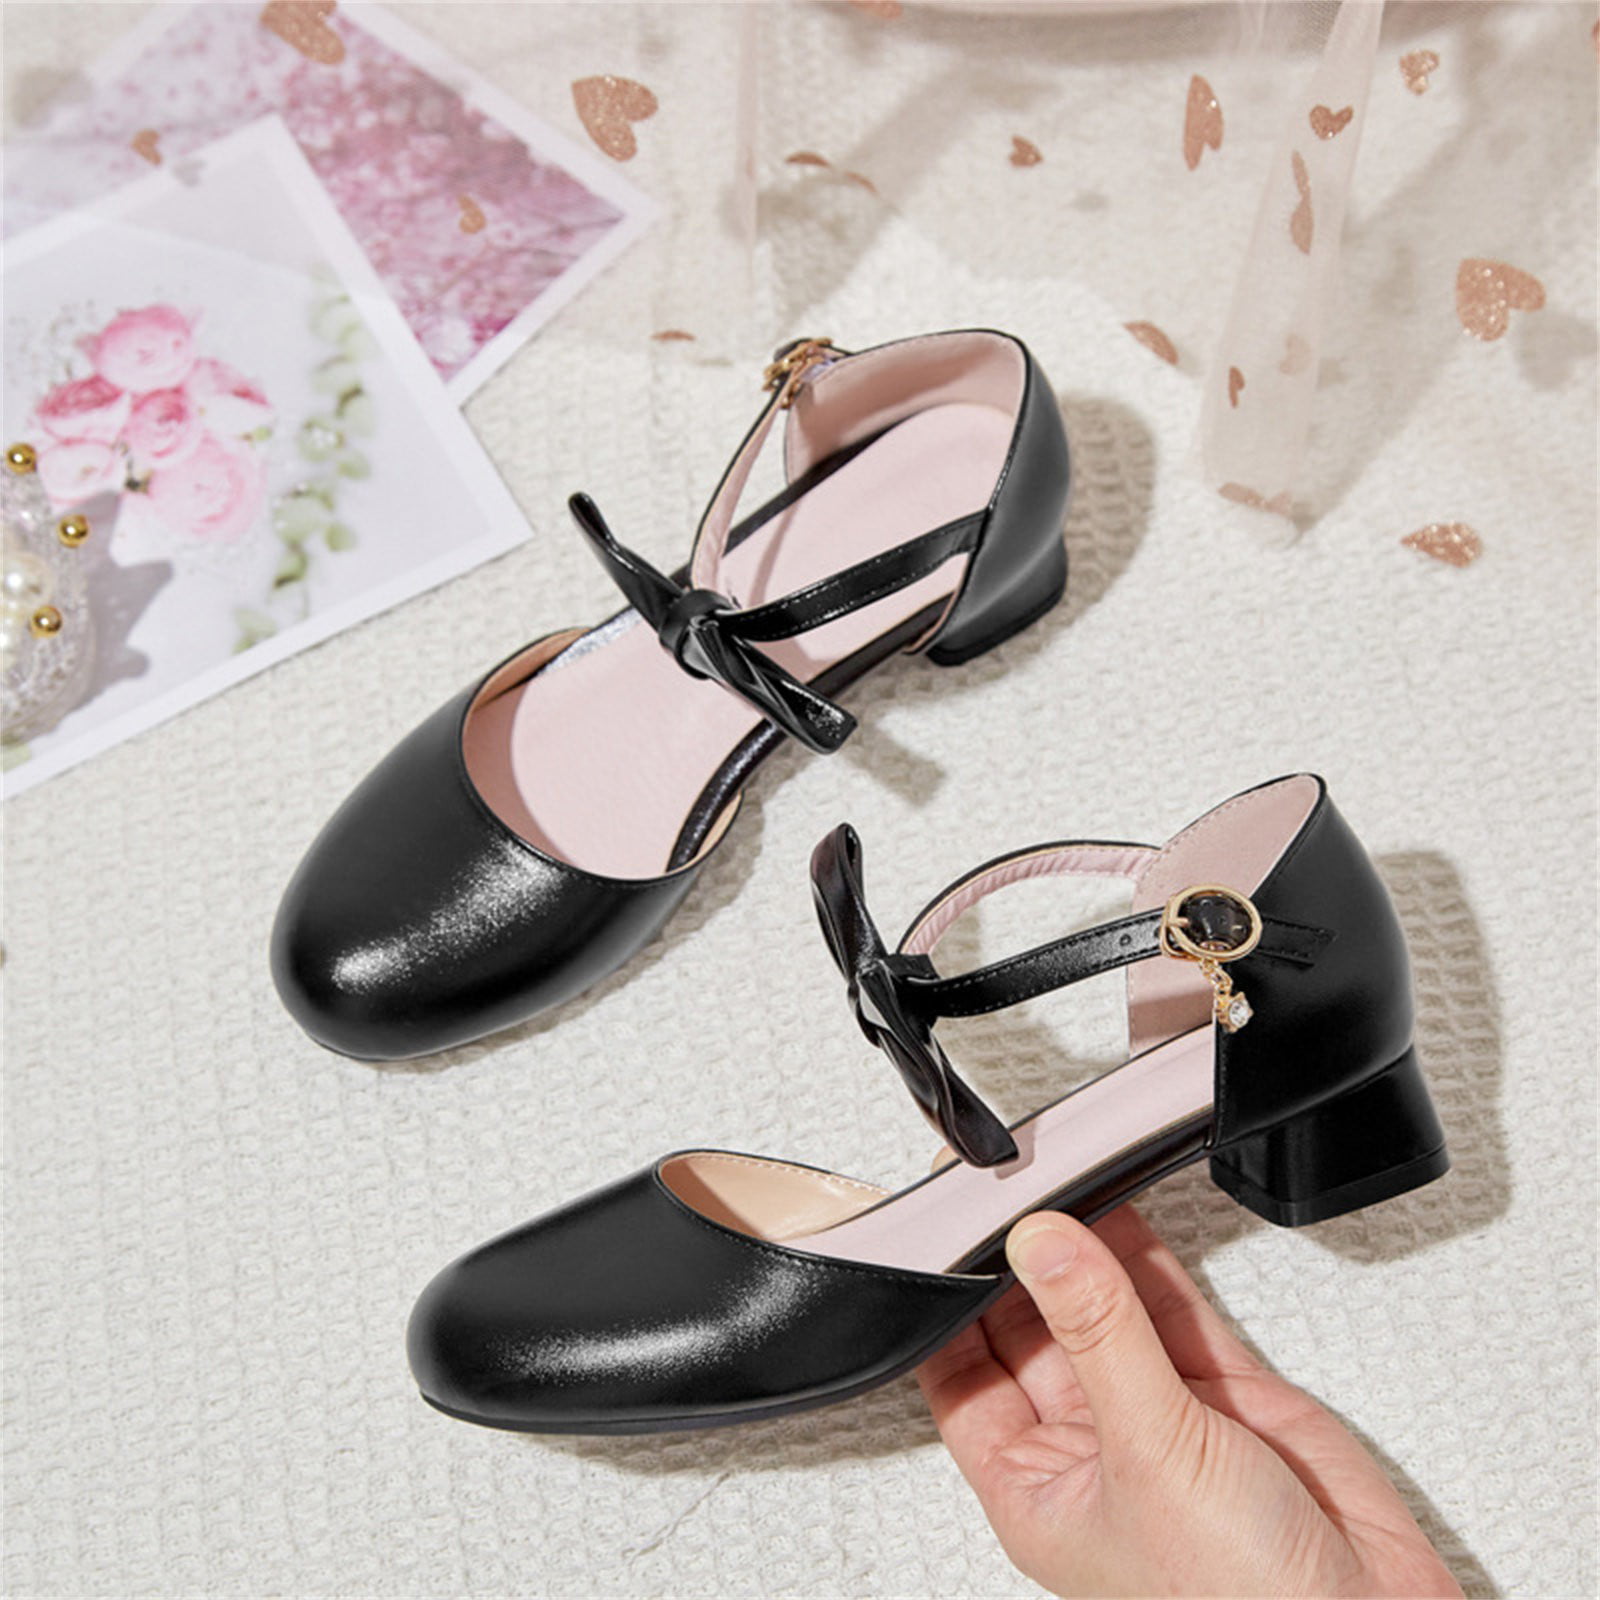 Children Girls High Heel Shoes For Kids Princess Sandals Fashion Diamond  Female Children High Heels For Party Wedding Woman - Leather Shoes -  AliExpress